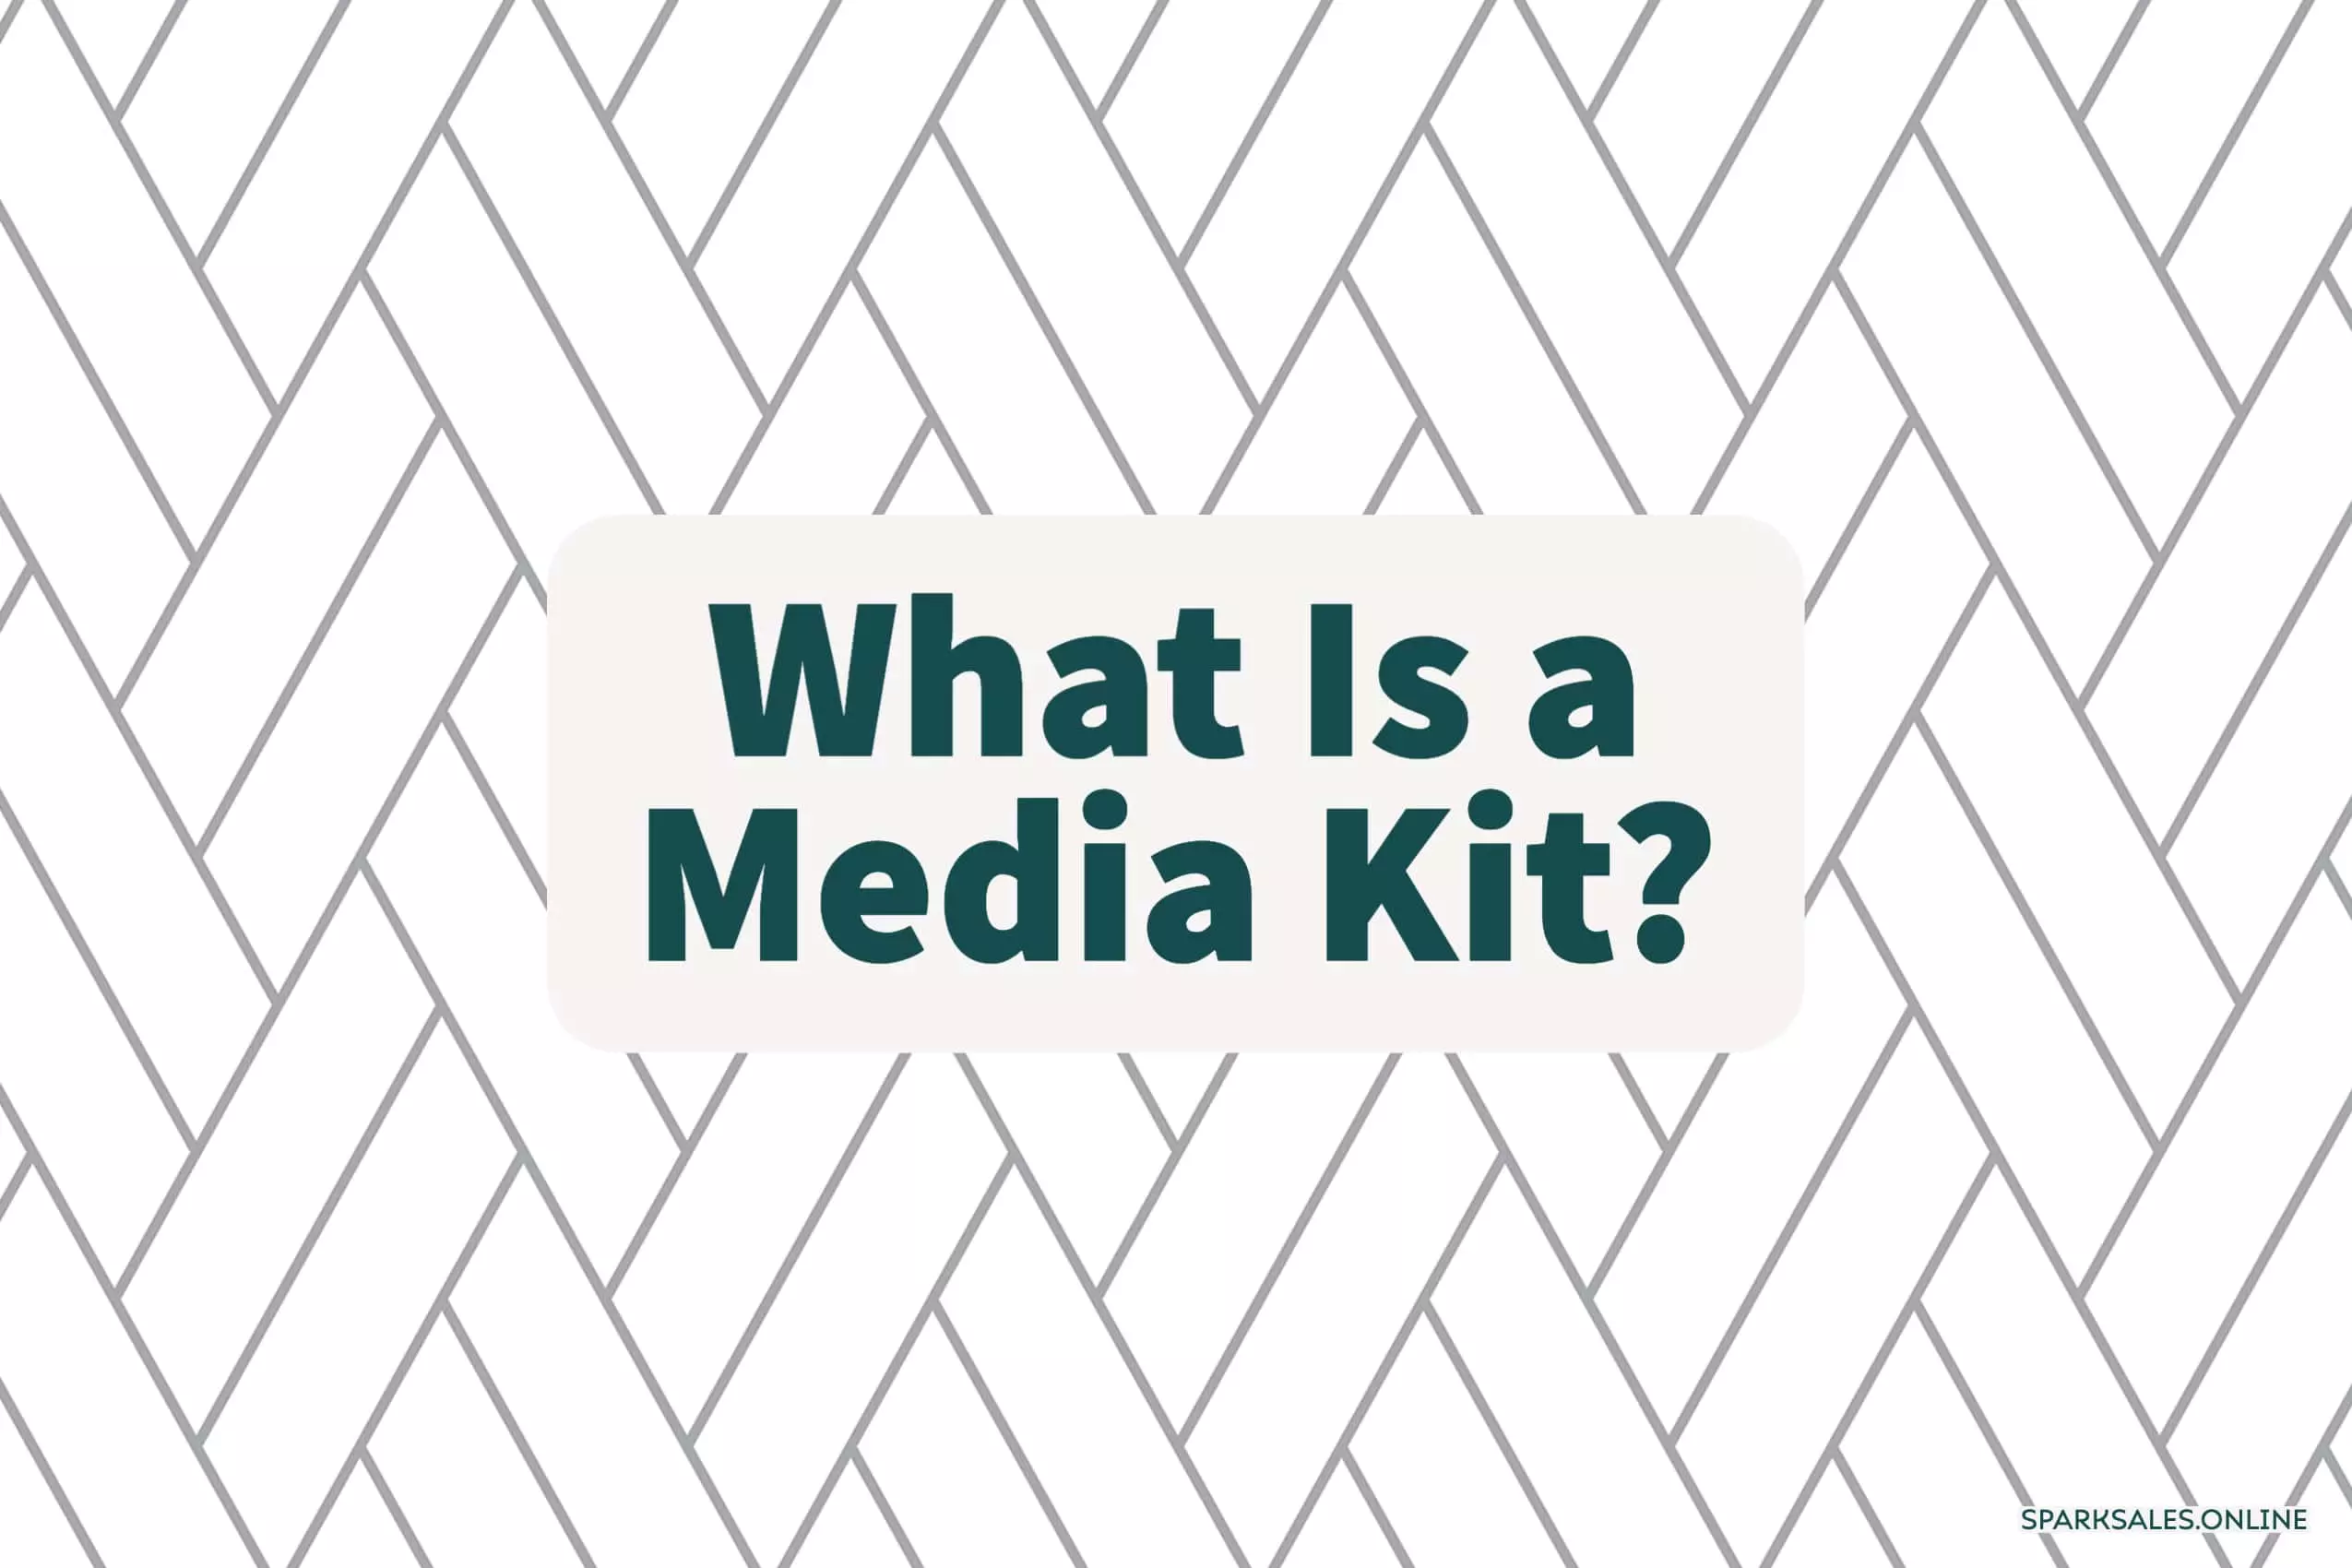 What is a media kit?